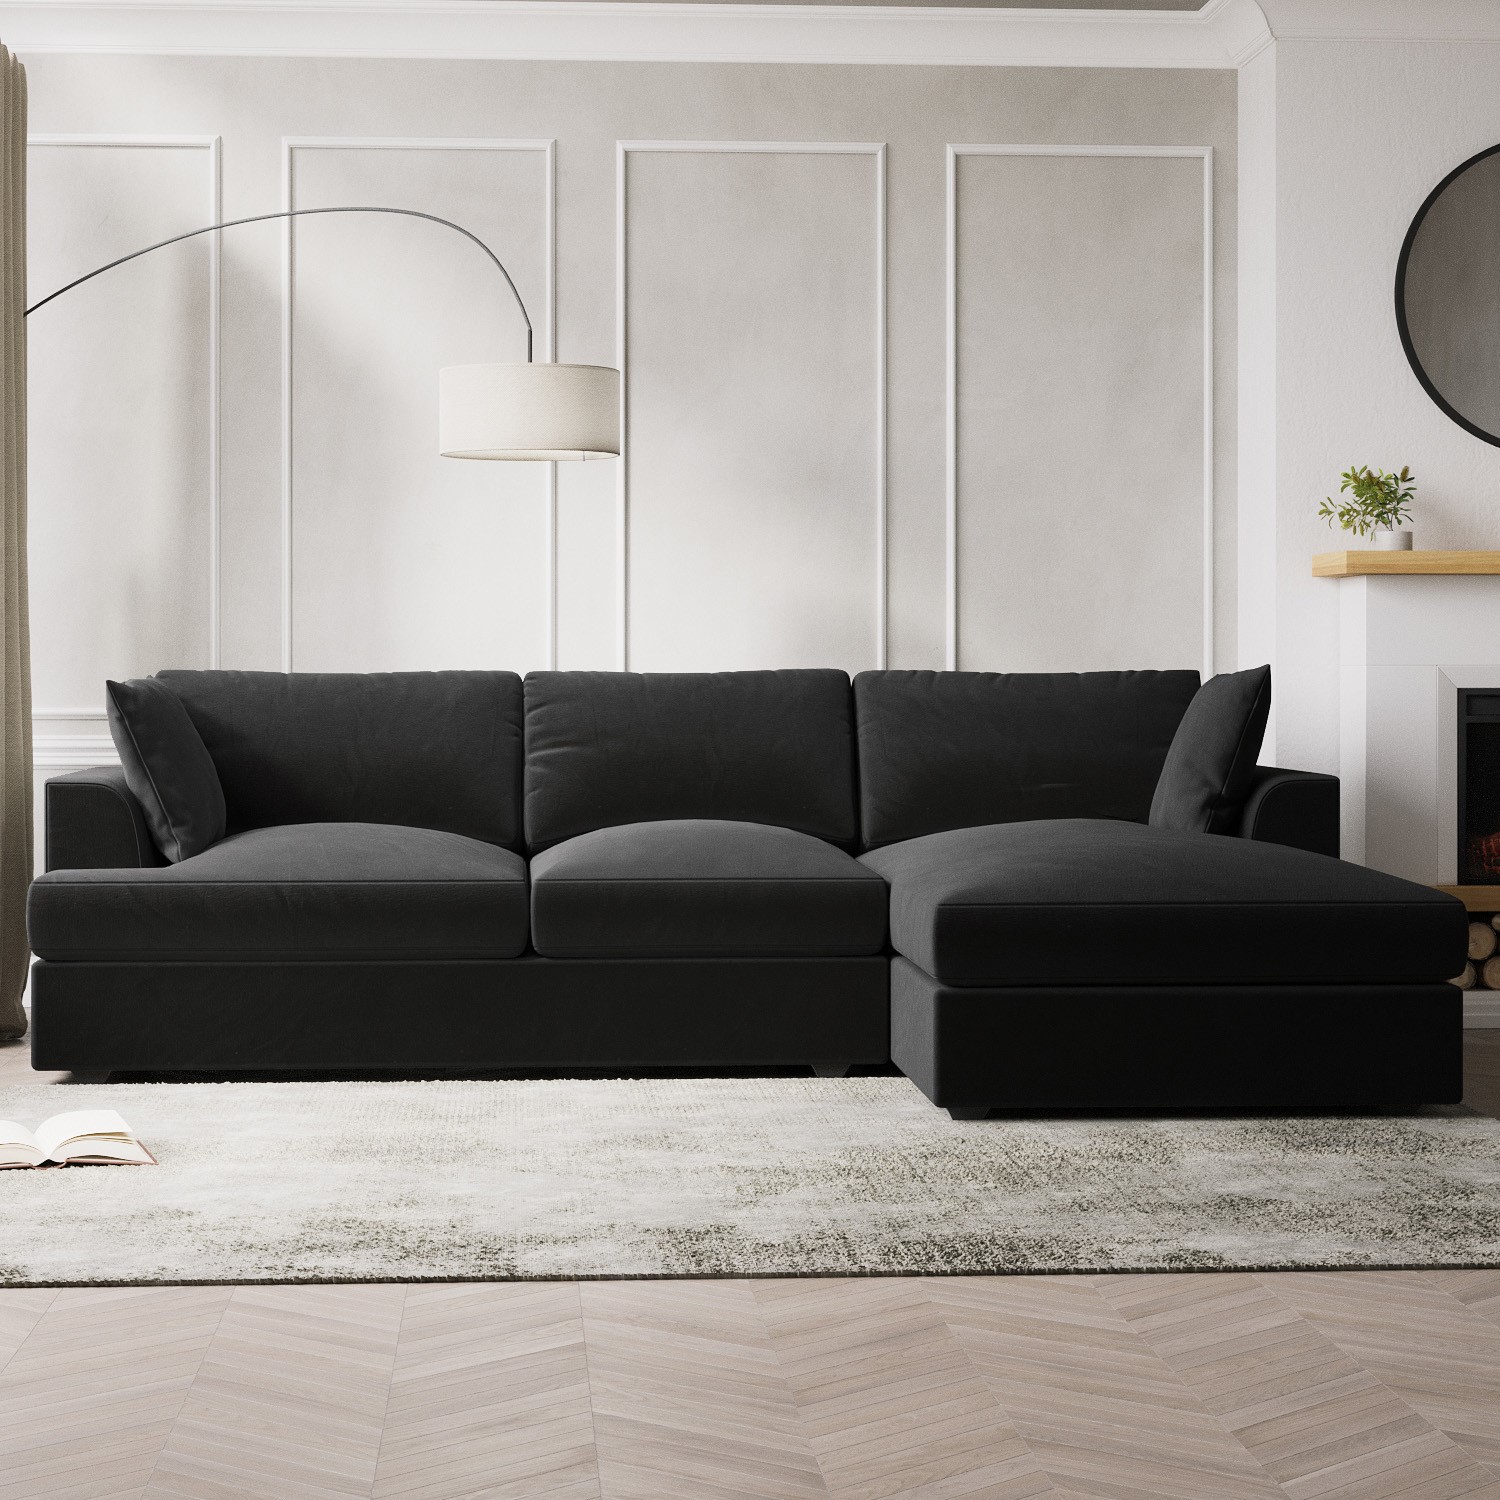 Read more about Dark grey velvet right hand l shaped sofa seats 4 august